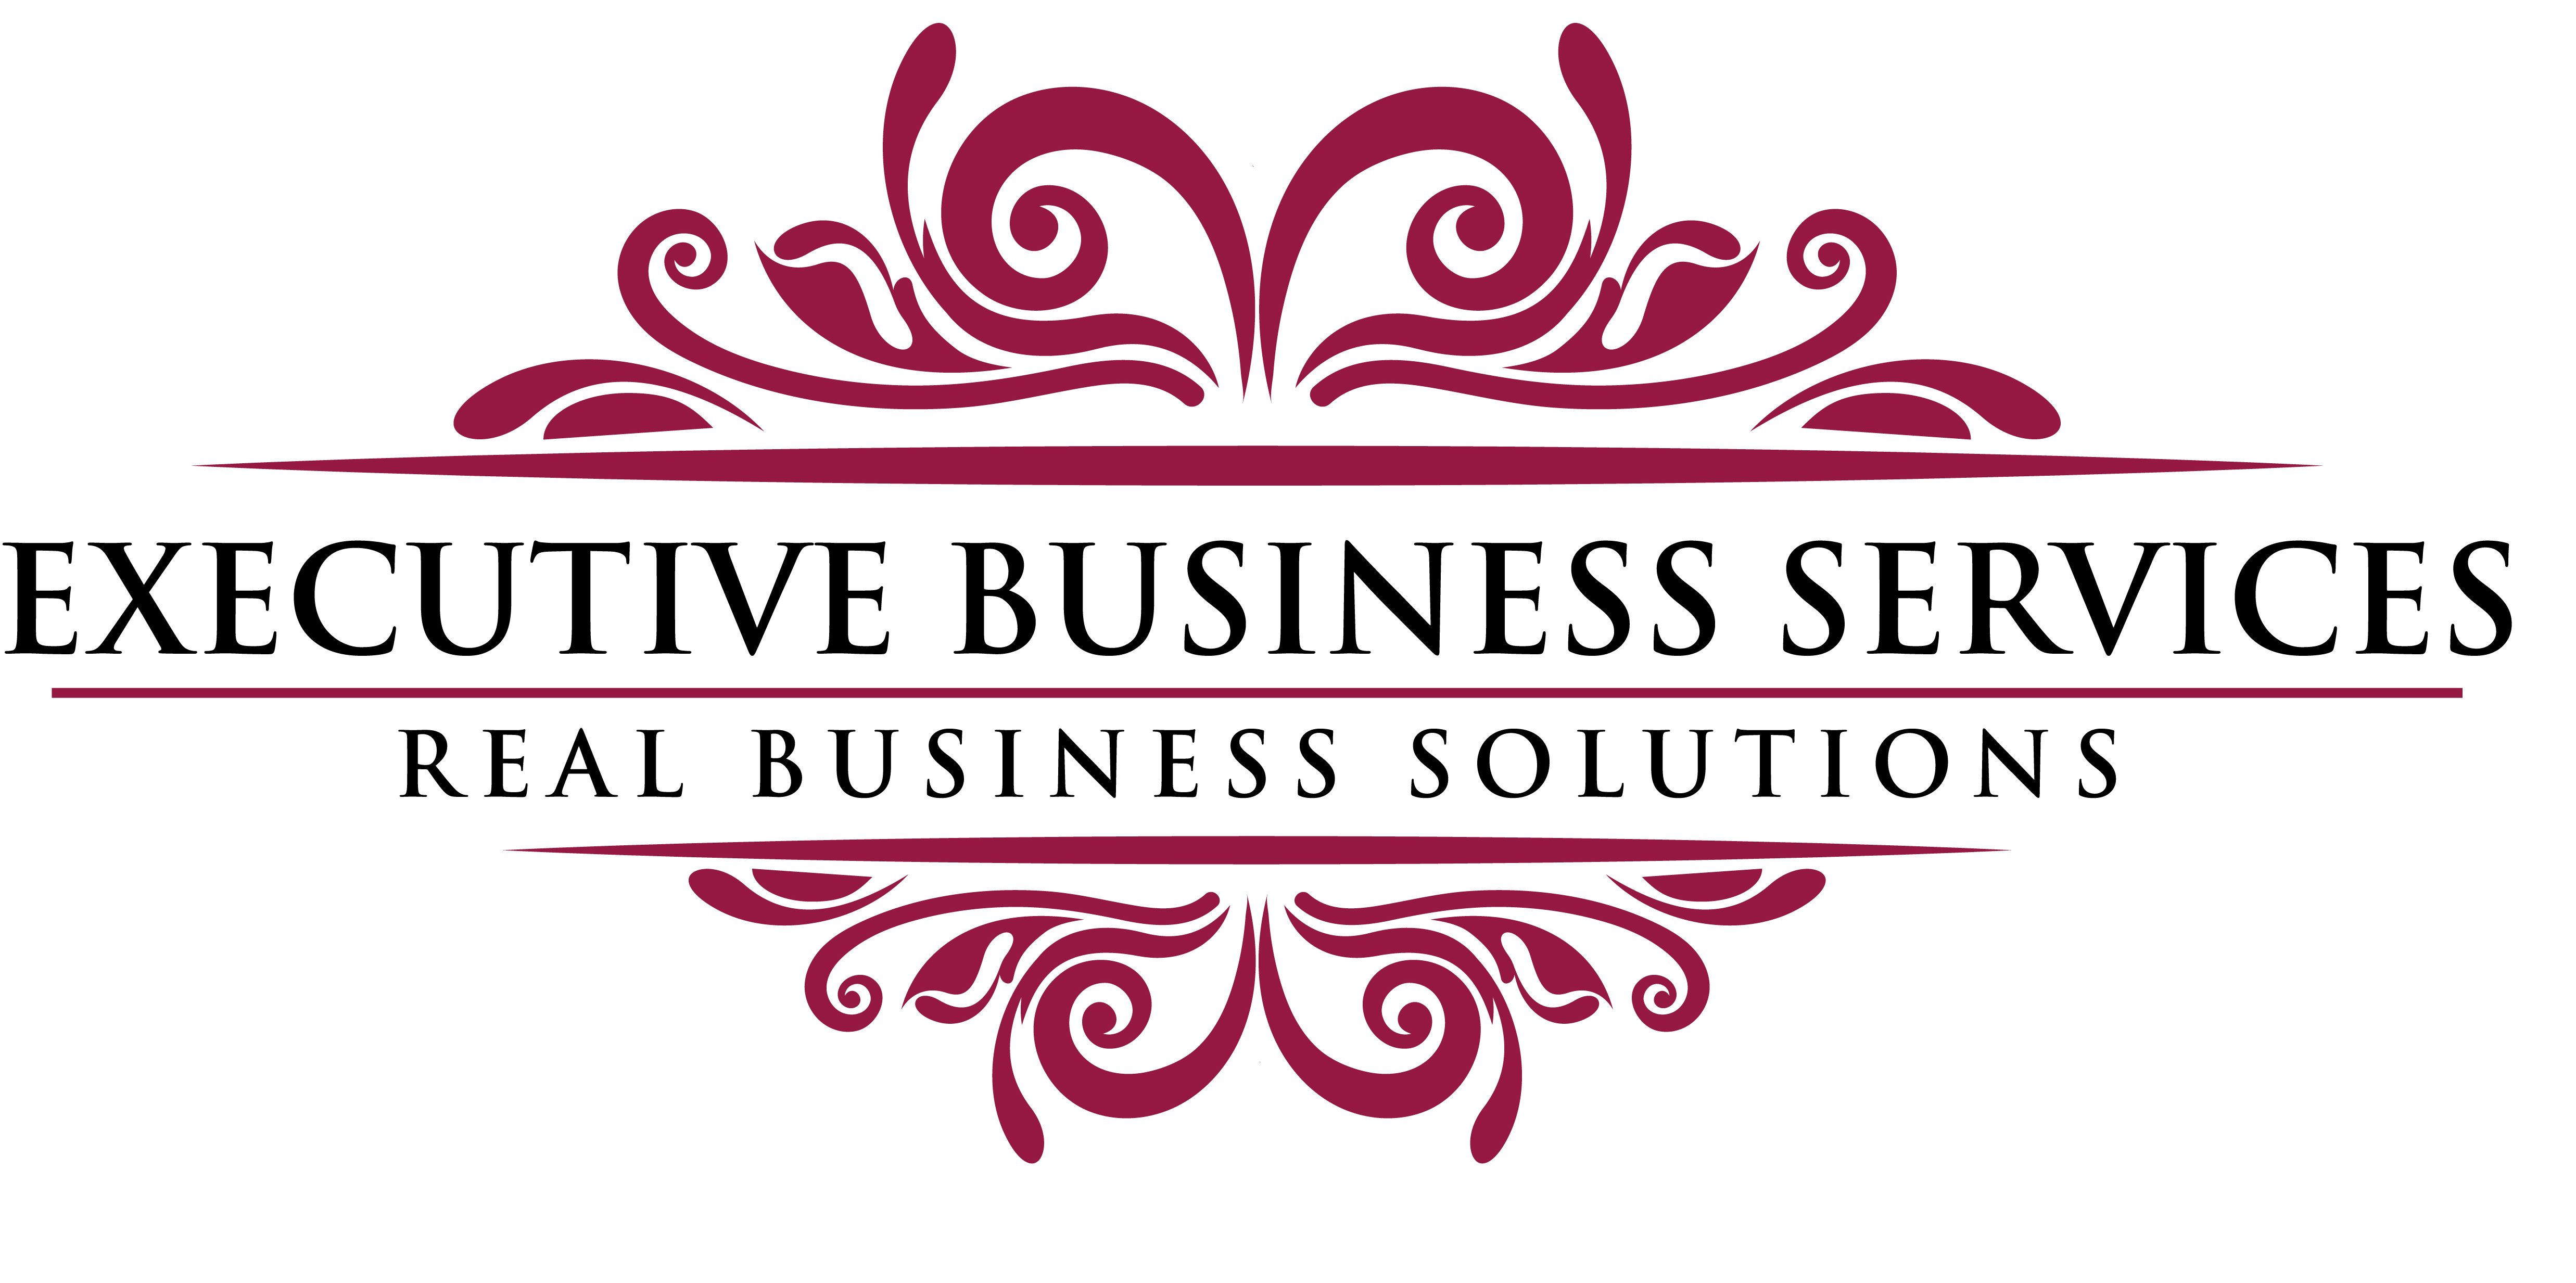 Virtual Assisting and Business Advisory Firm